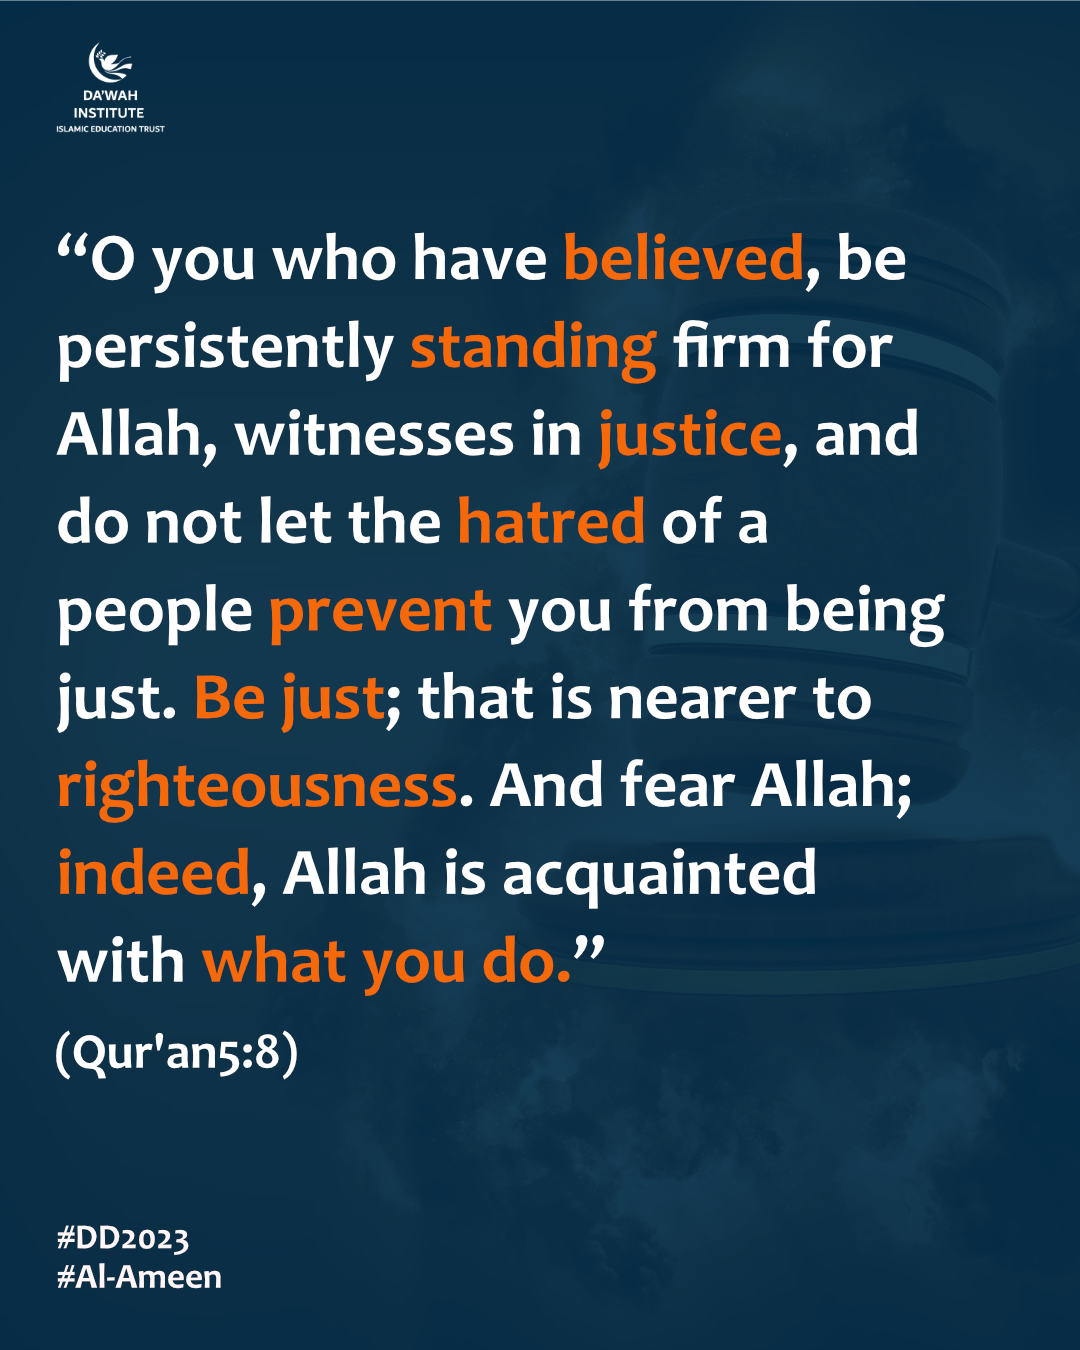 O you who have believed, be persistently standing firm for Allah, witnesses in justice, and do not let the hatred of a people prevent you from being just